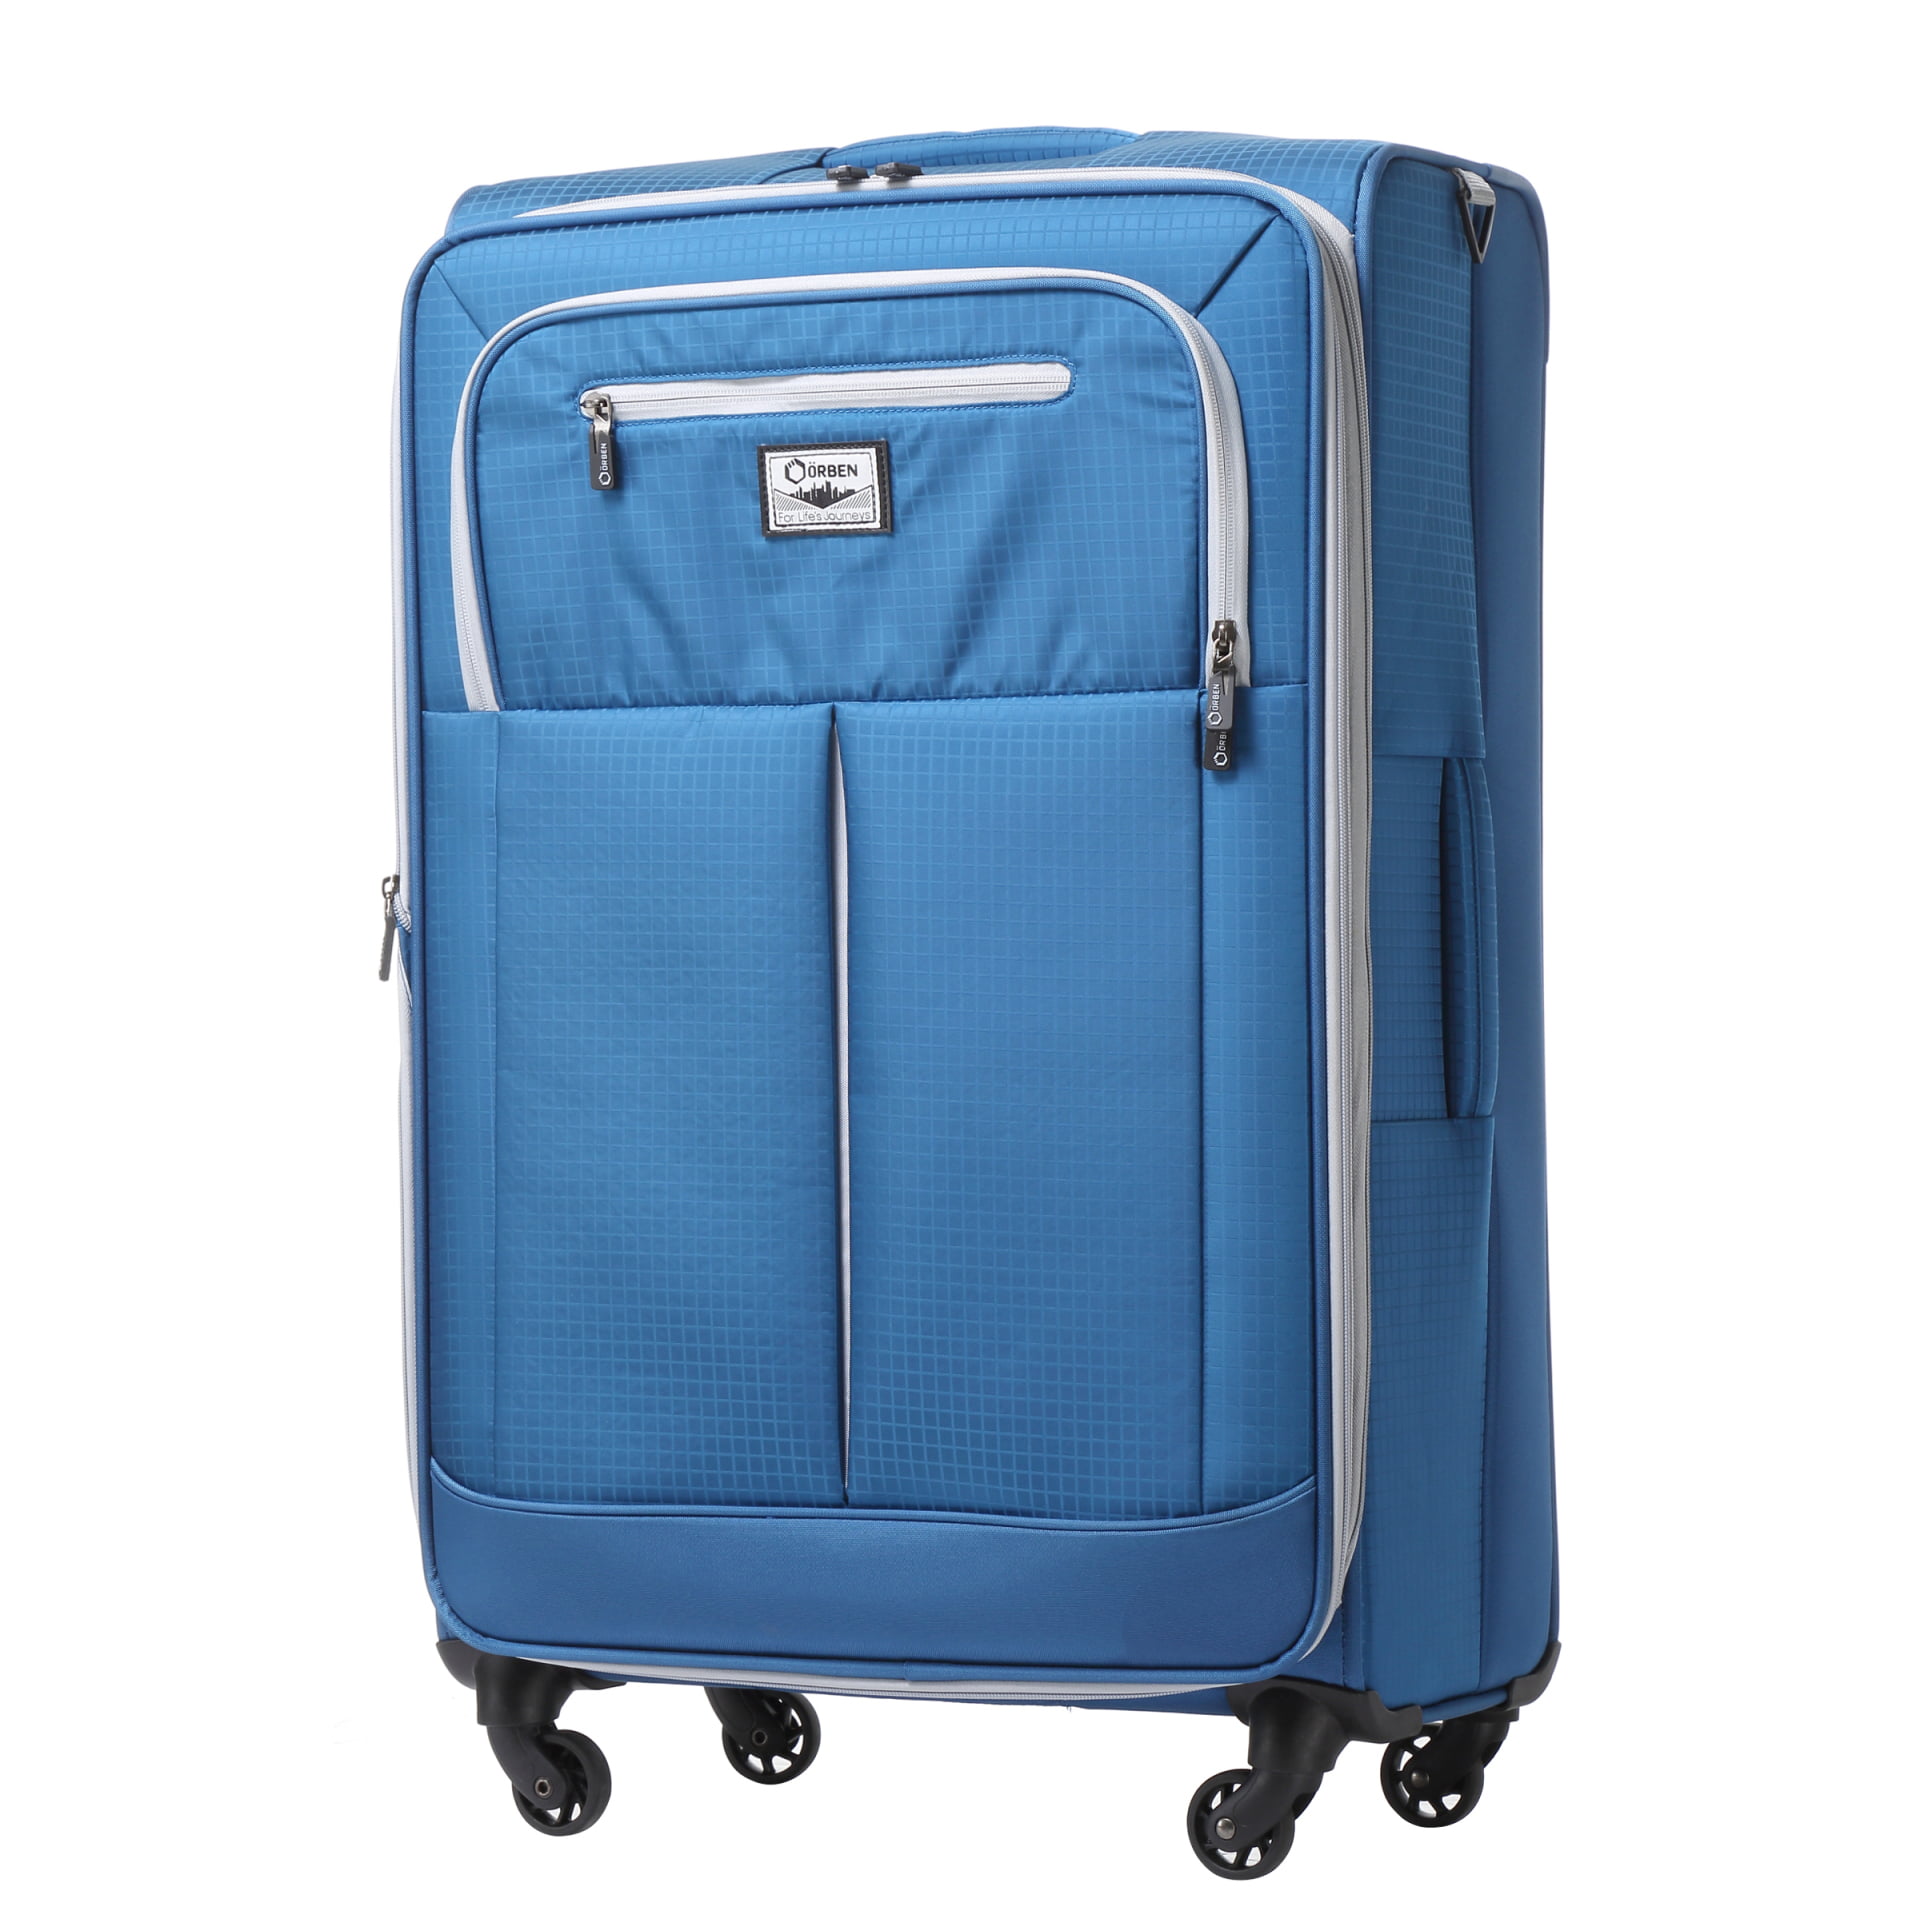 Luggage Carry-Ons ORBEN 28 Inch Travel Luggage Wheeled Suitcase